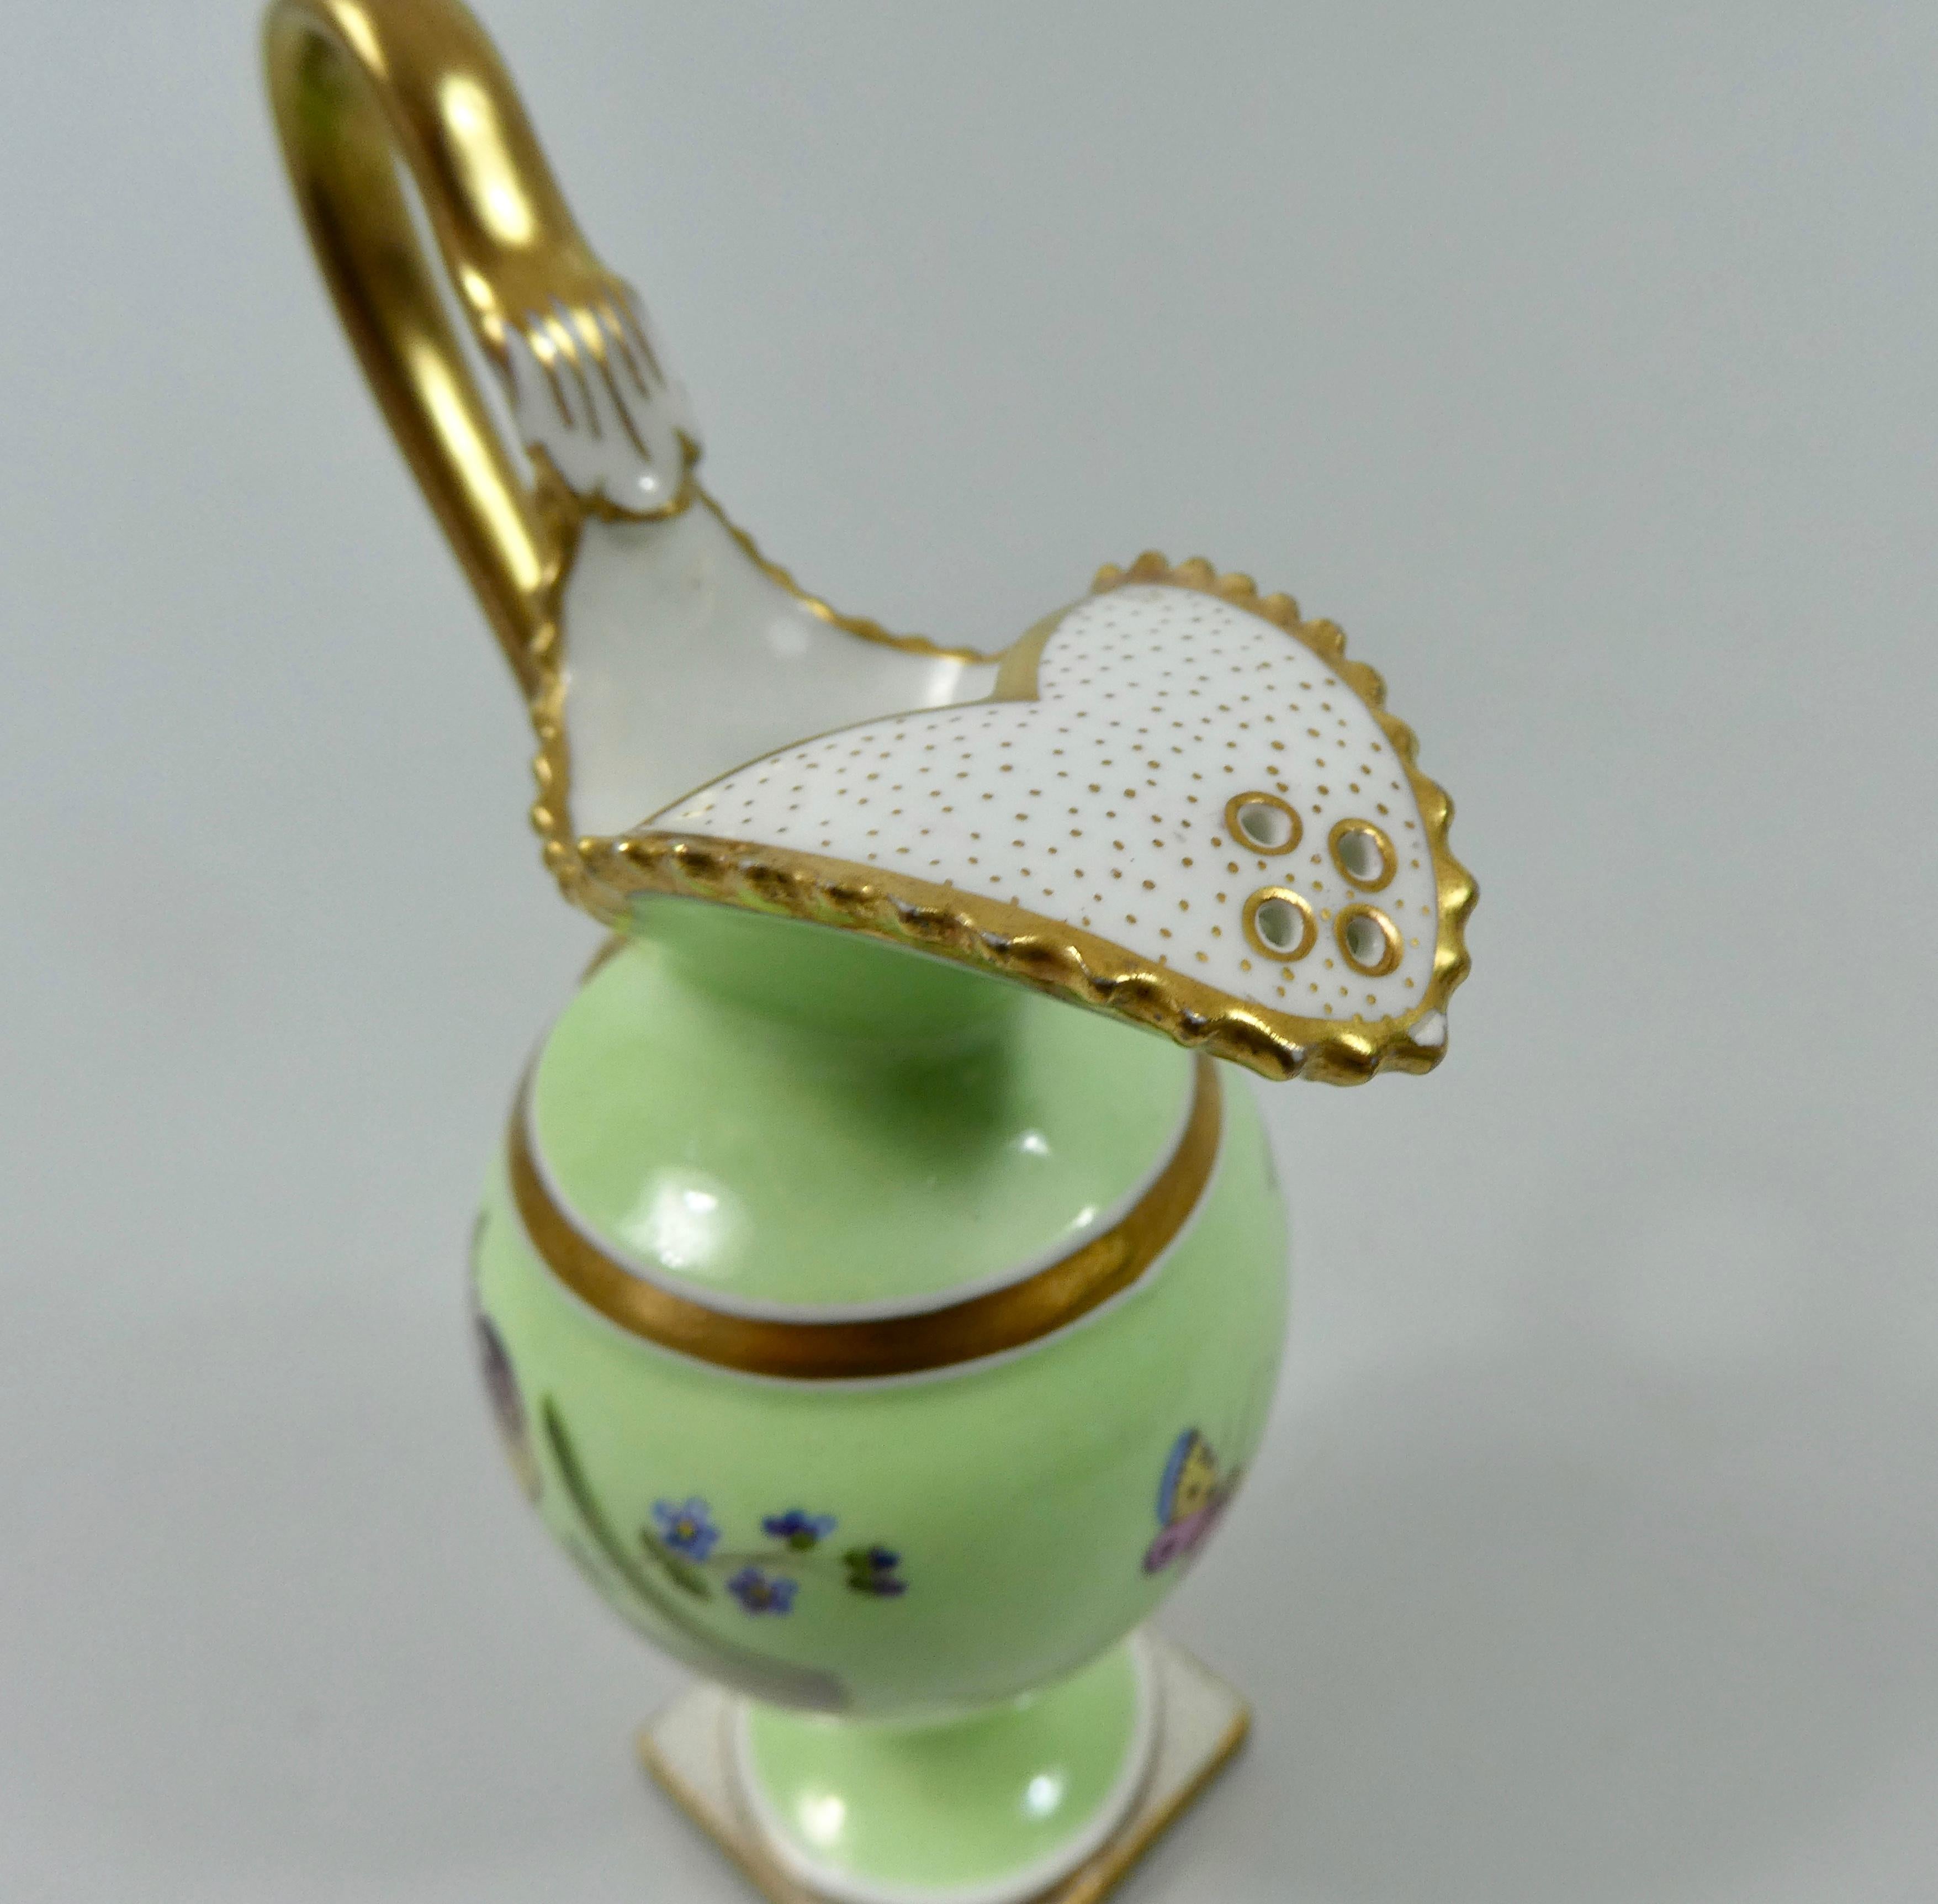 Early 19th Century FBB Worcester Porcelain Miniature Ewer, circa 1810